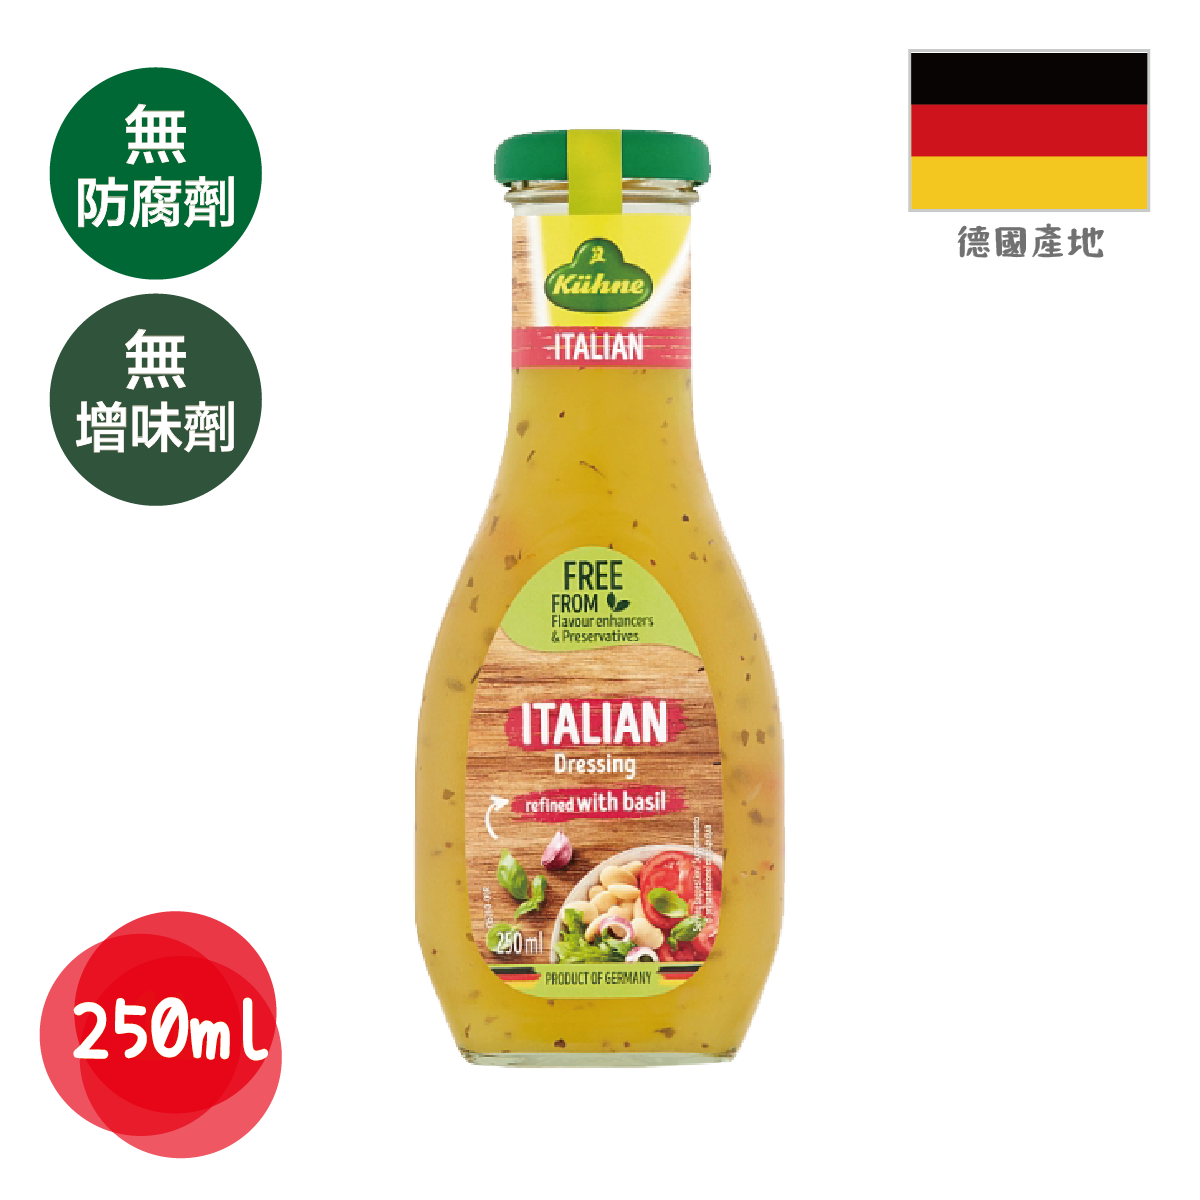 Italian Dressing Imported From Europe 250ml (Best before: 18/01/2025) #Imported from Europe